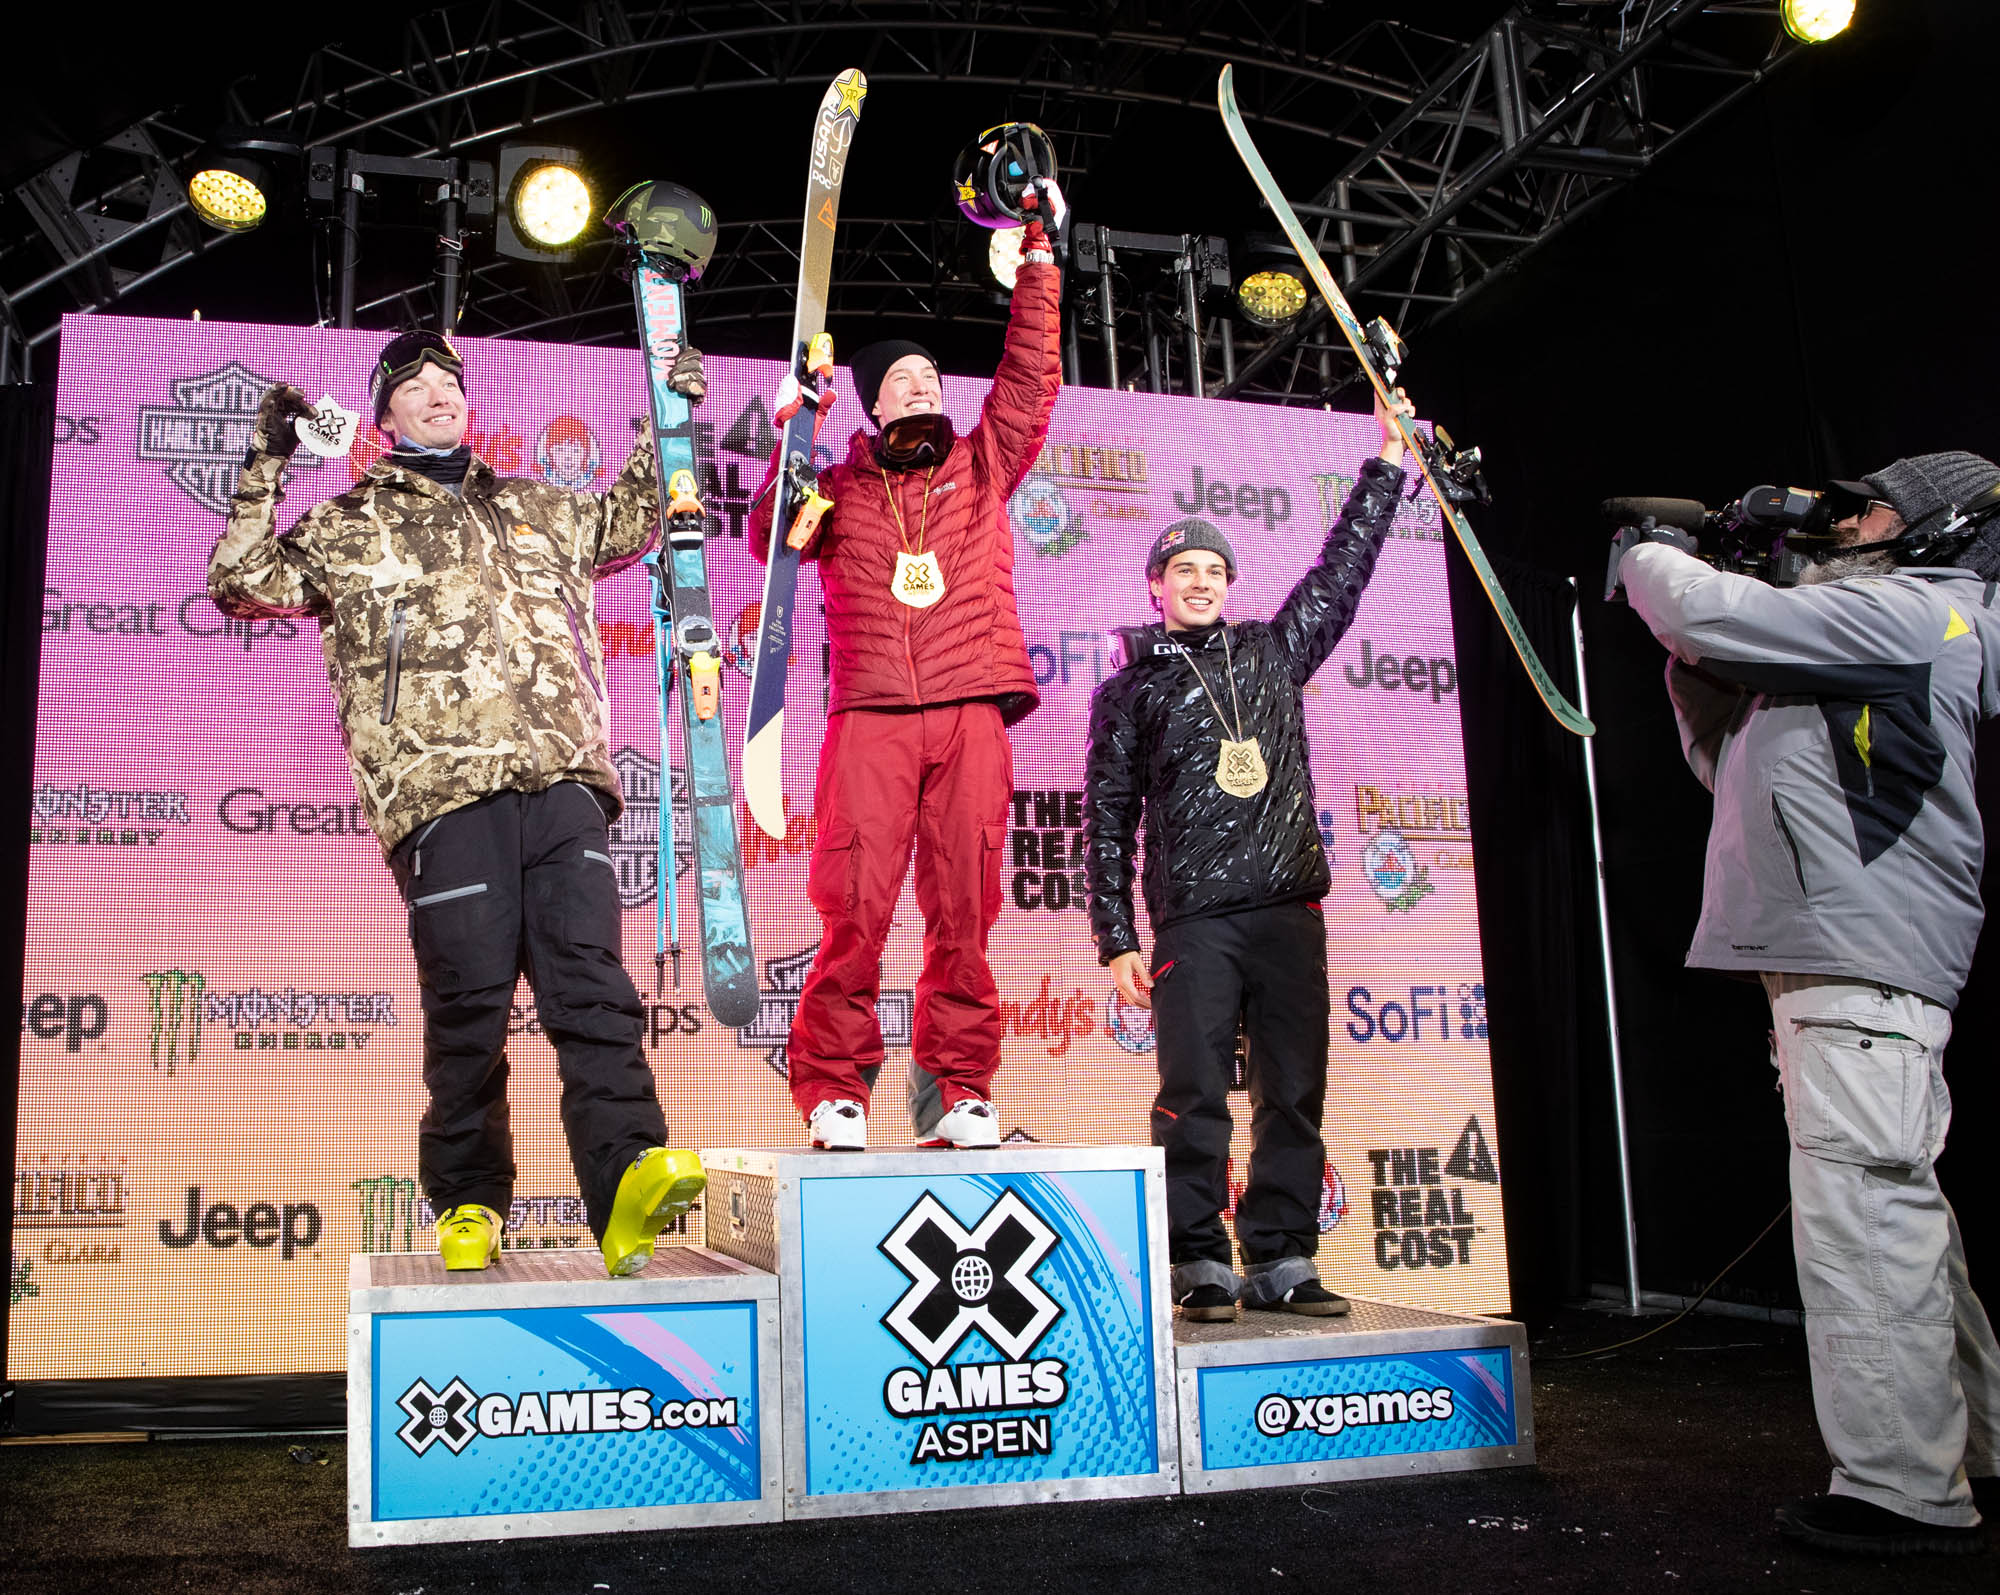 Monster Energy's David Wise Takes Silver in Men's Ski SuperPipe at X Games Aspen 2019